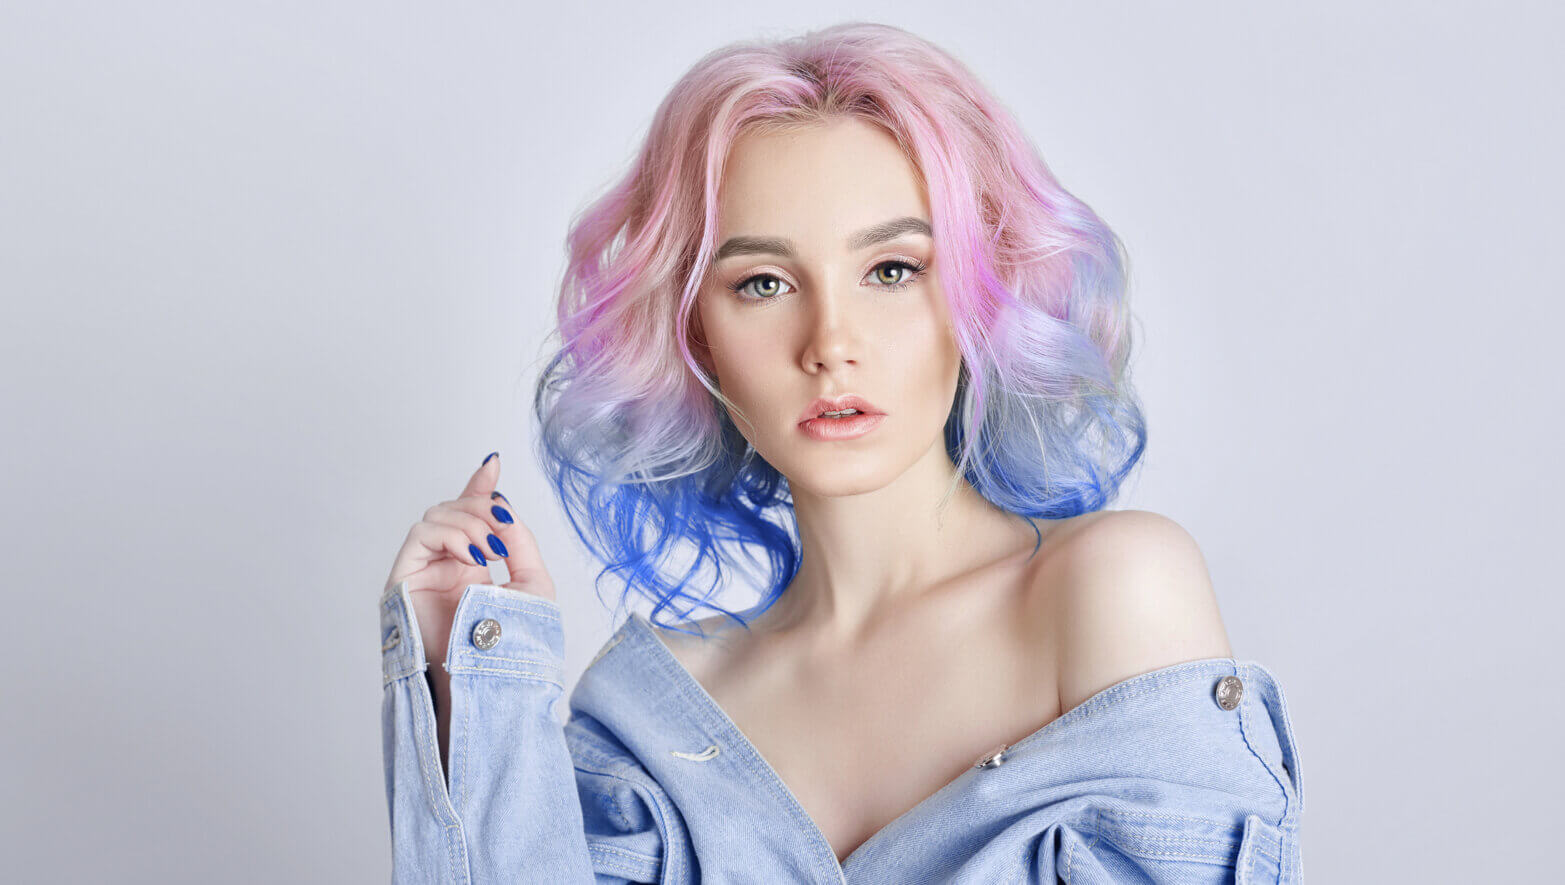 Image of a woman with pink, purple, and blue hair